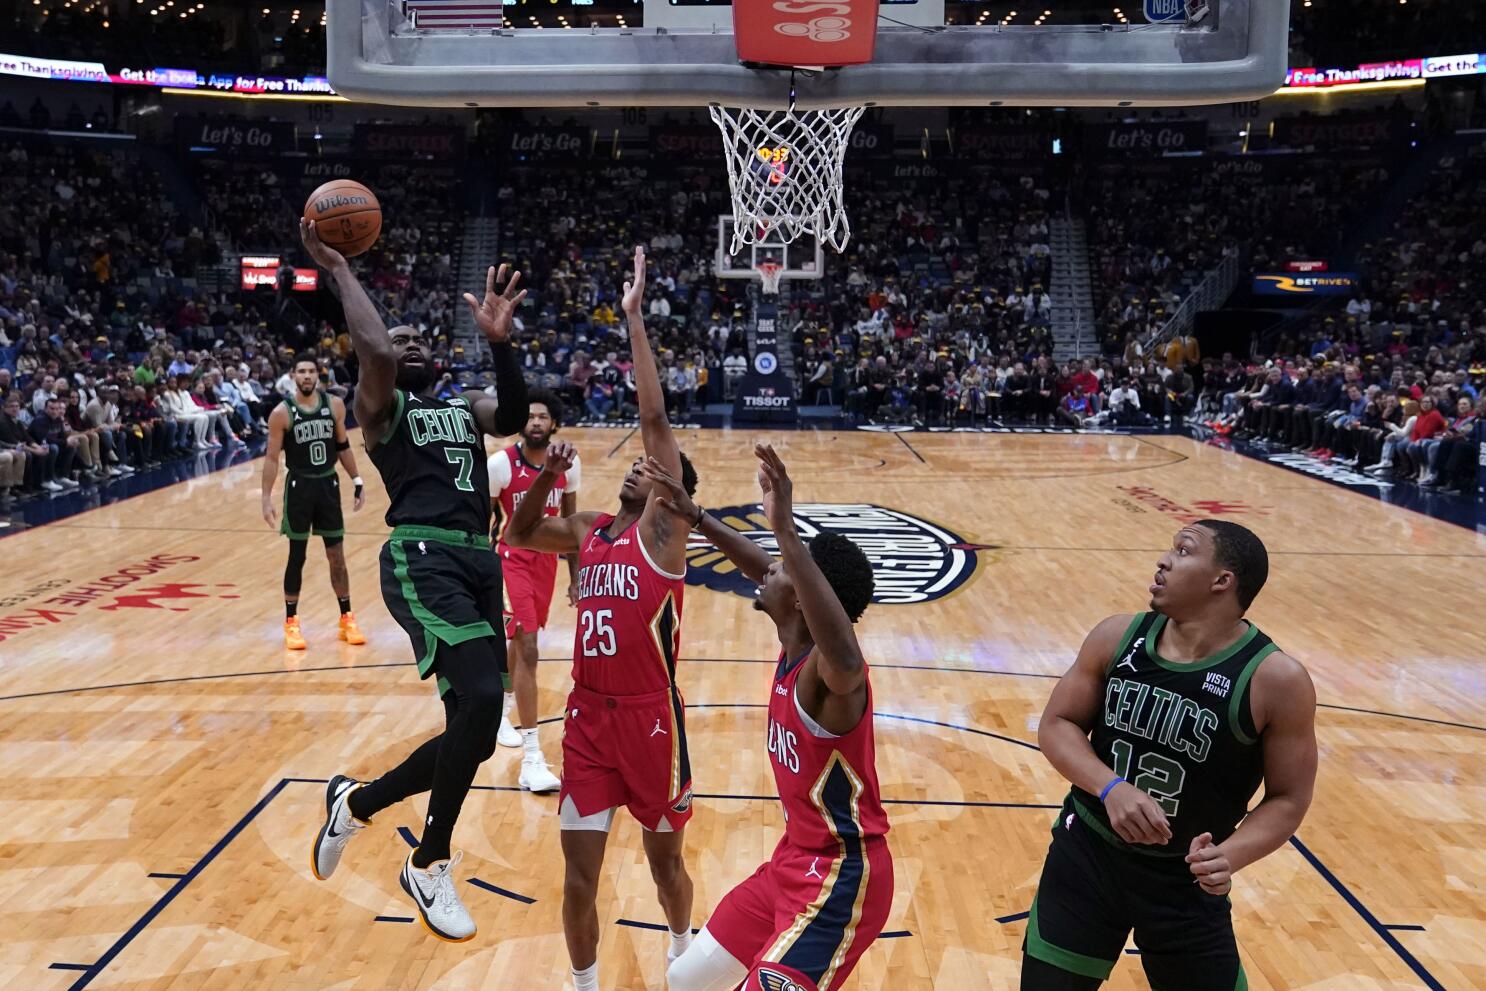 Keys to the Game: Celtics 117, Pelicans 109